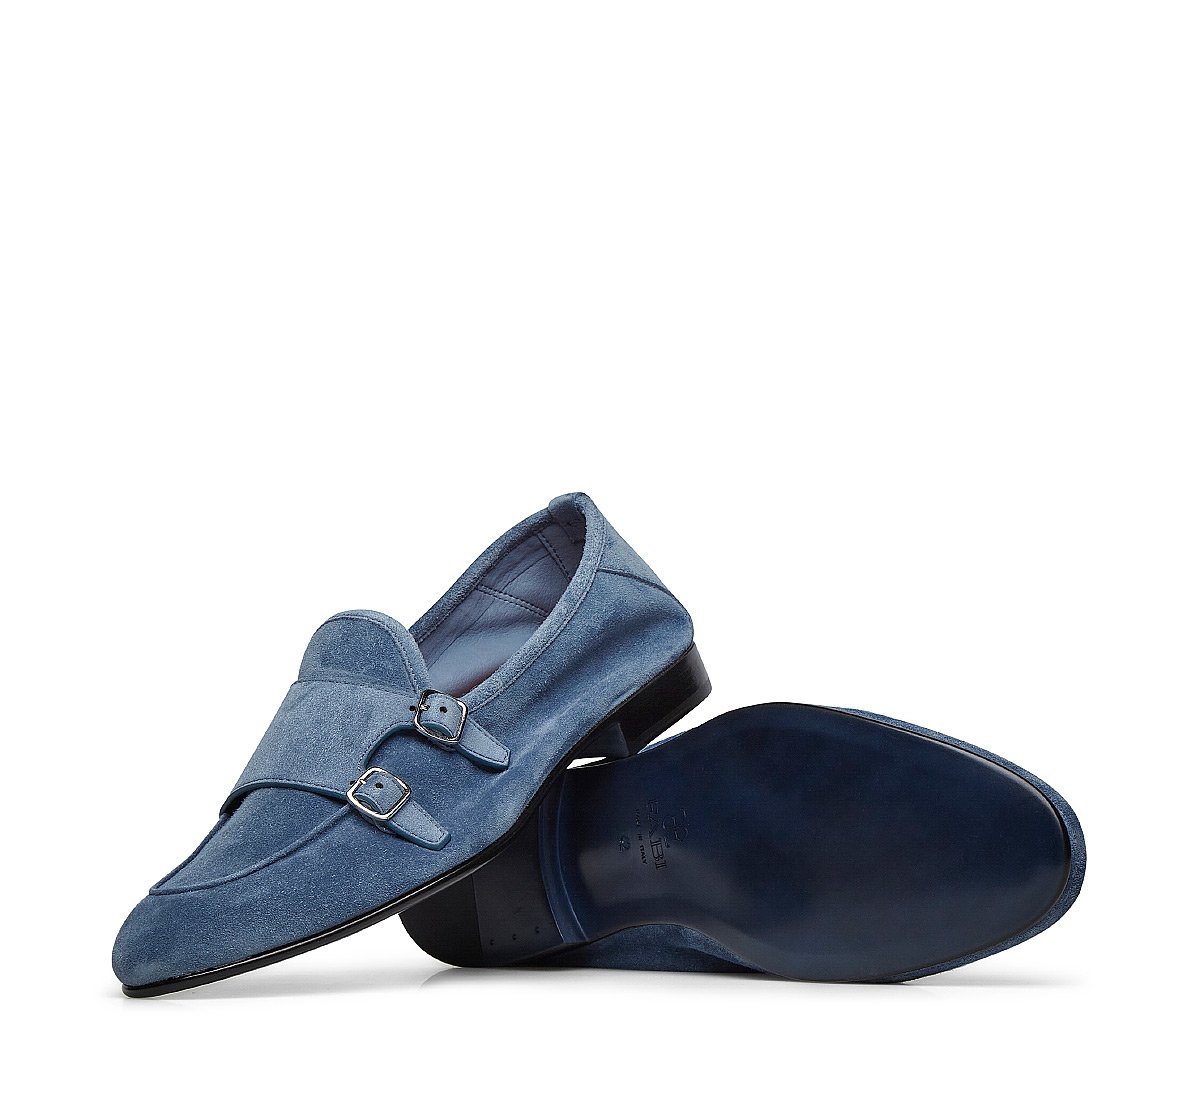 Unlined calfskin moccasin